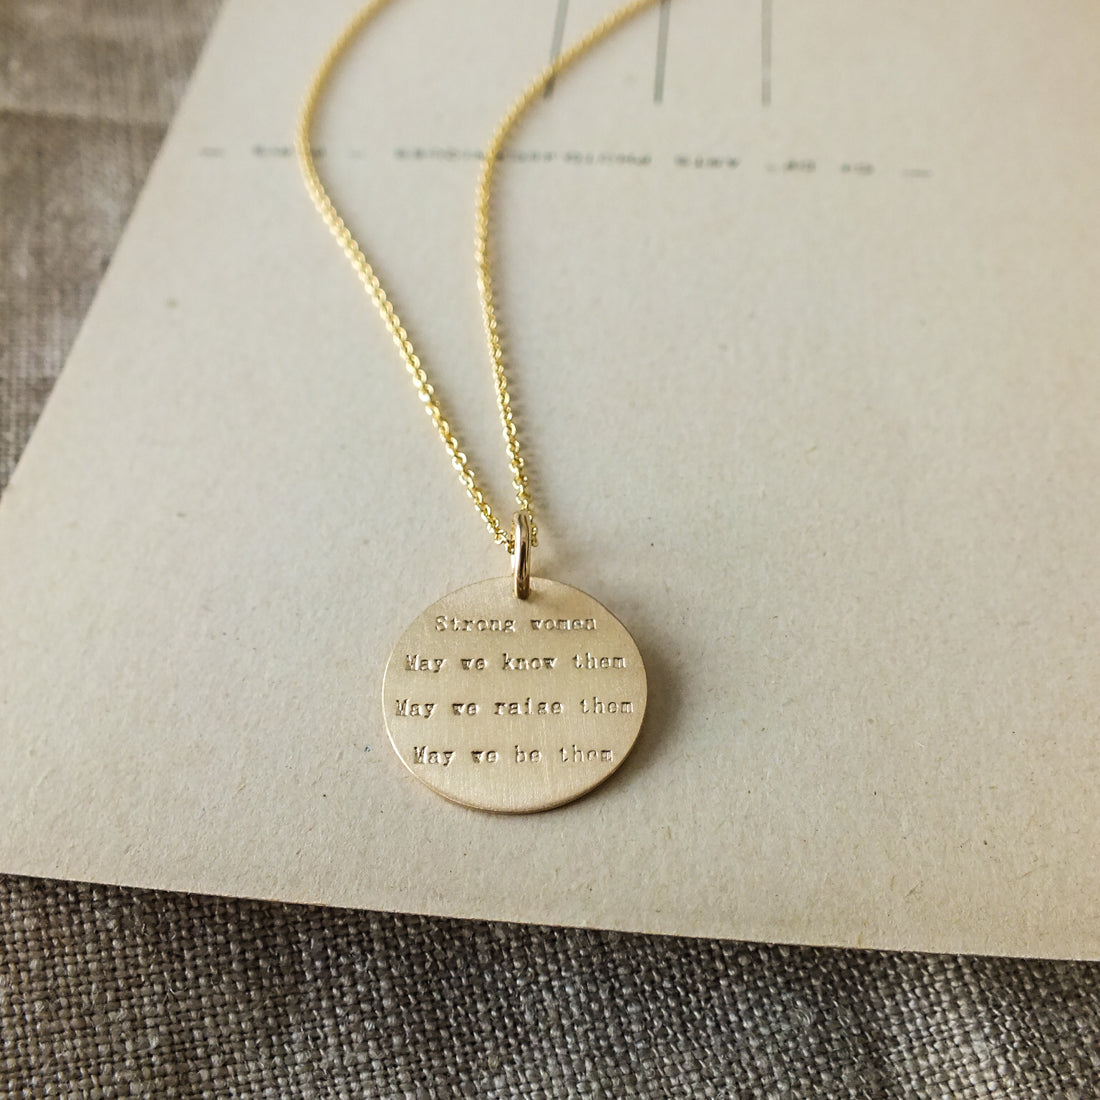 Becoming Jewelry&#39;s Strong Women Necklace is a sterling silver charm necklace with an engraved inspirational quote for strong women on a beige background.